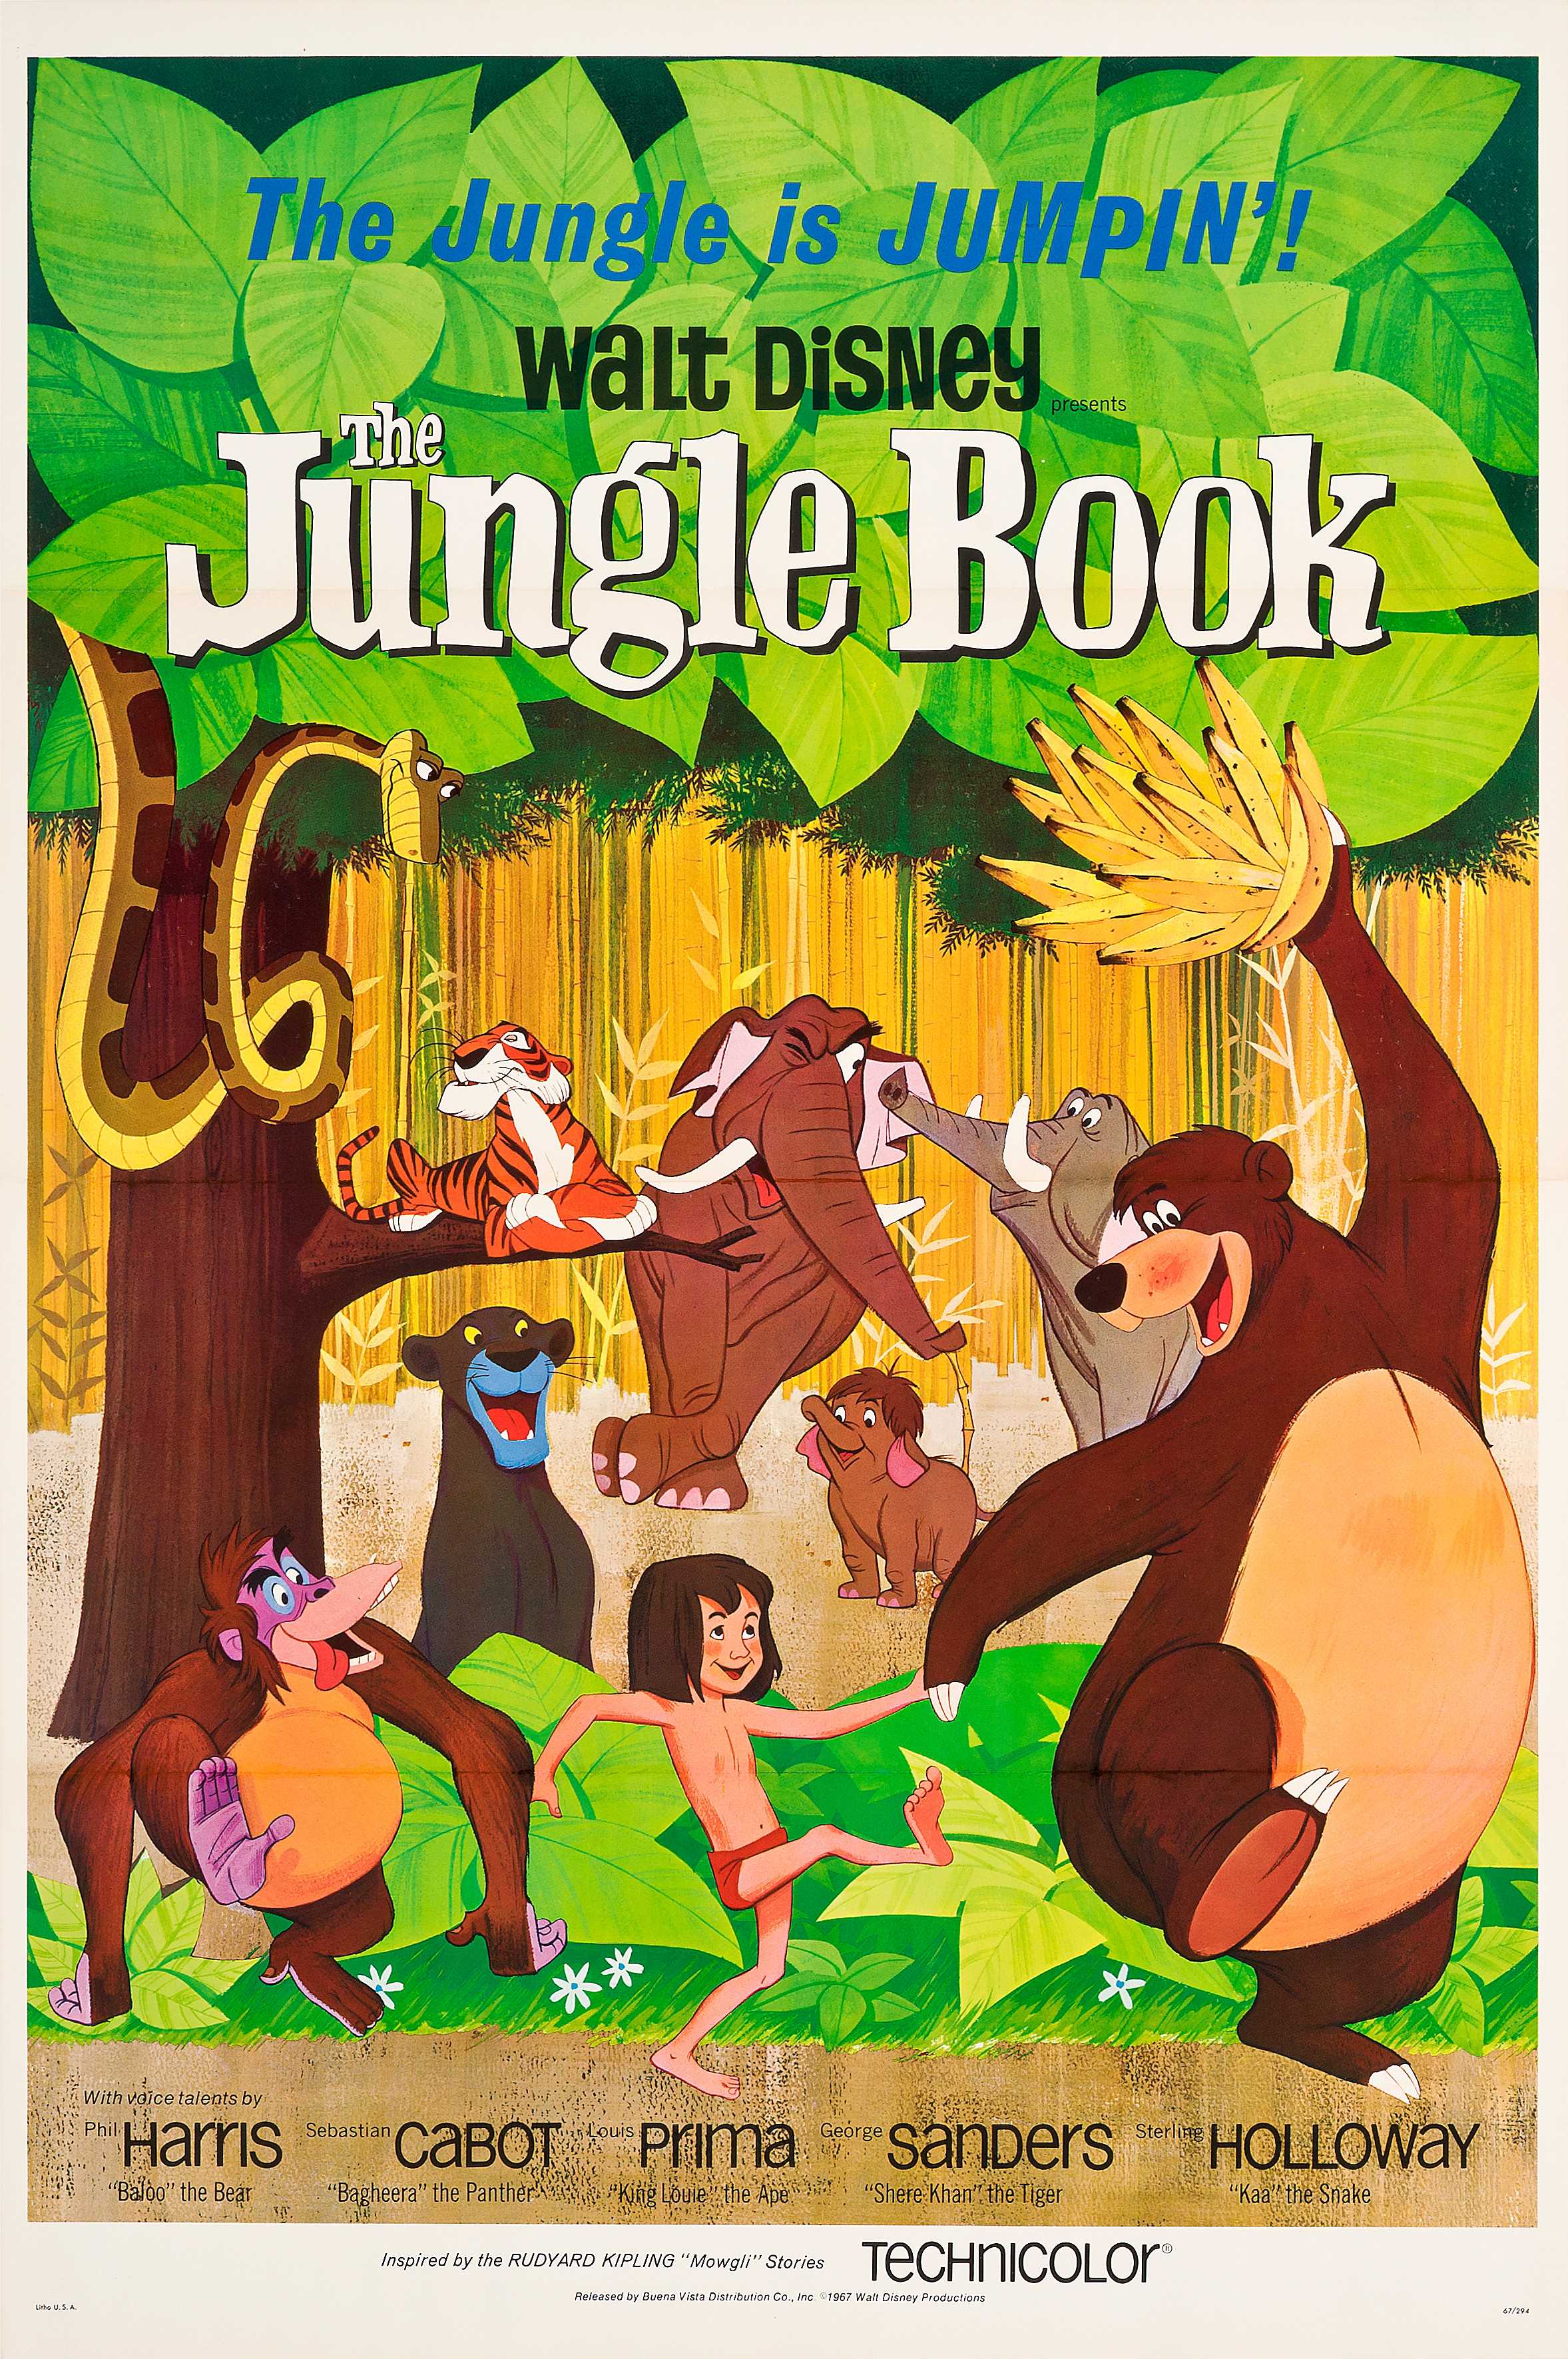 The Jungle Book download the new version for apple